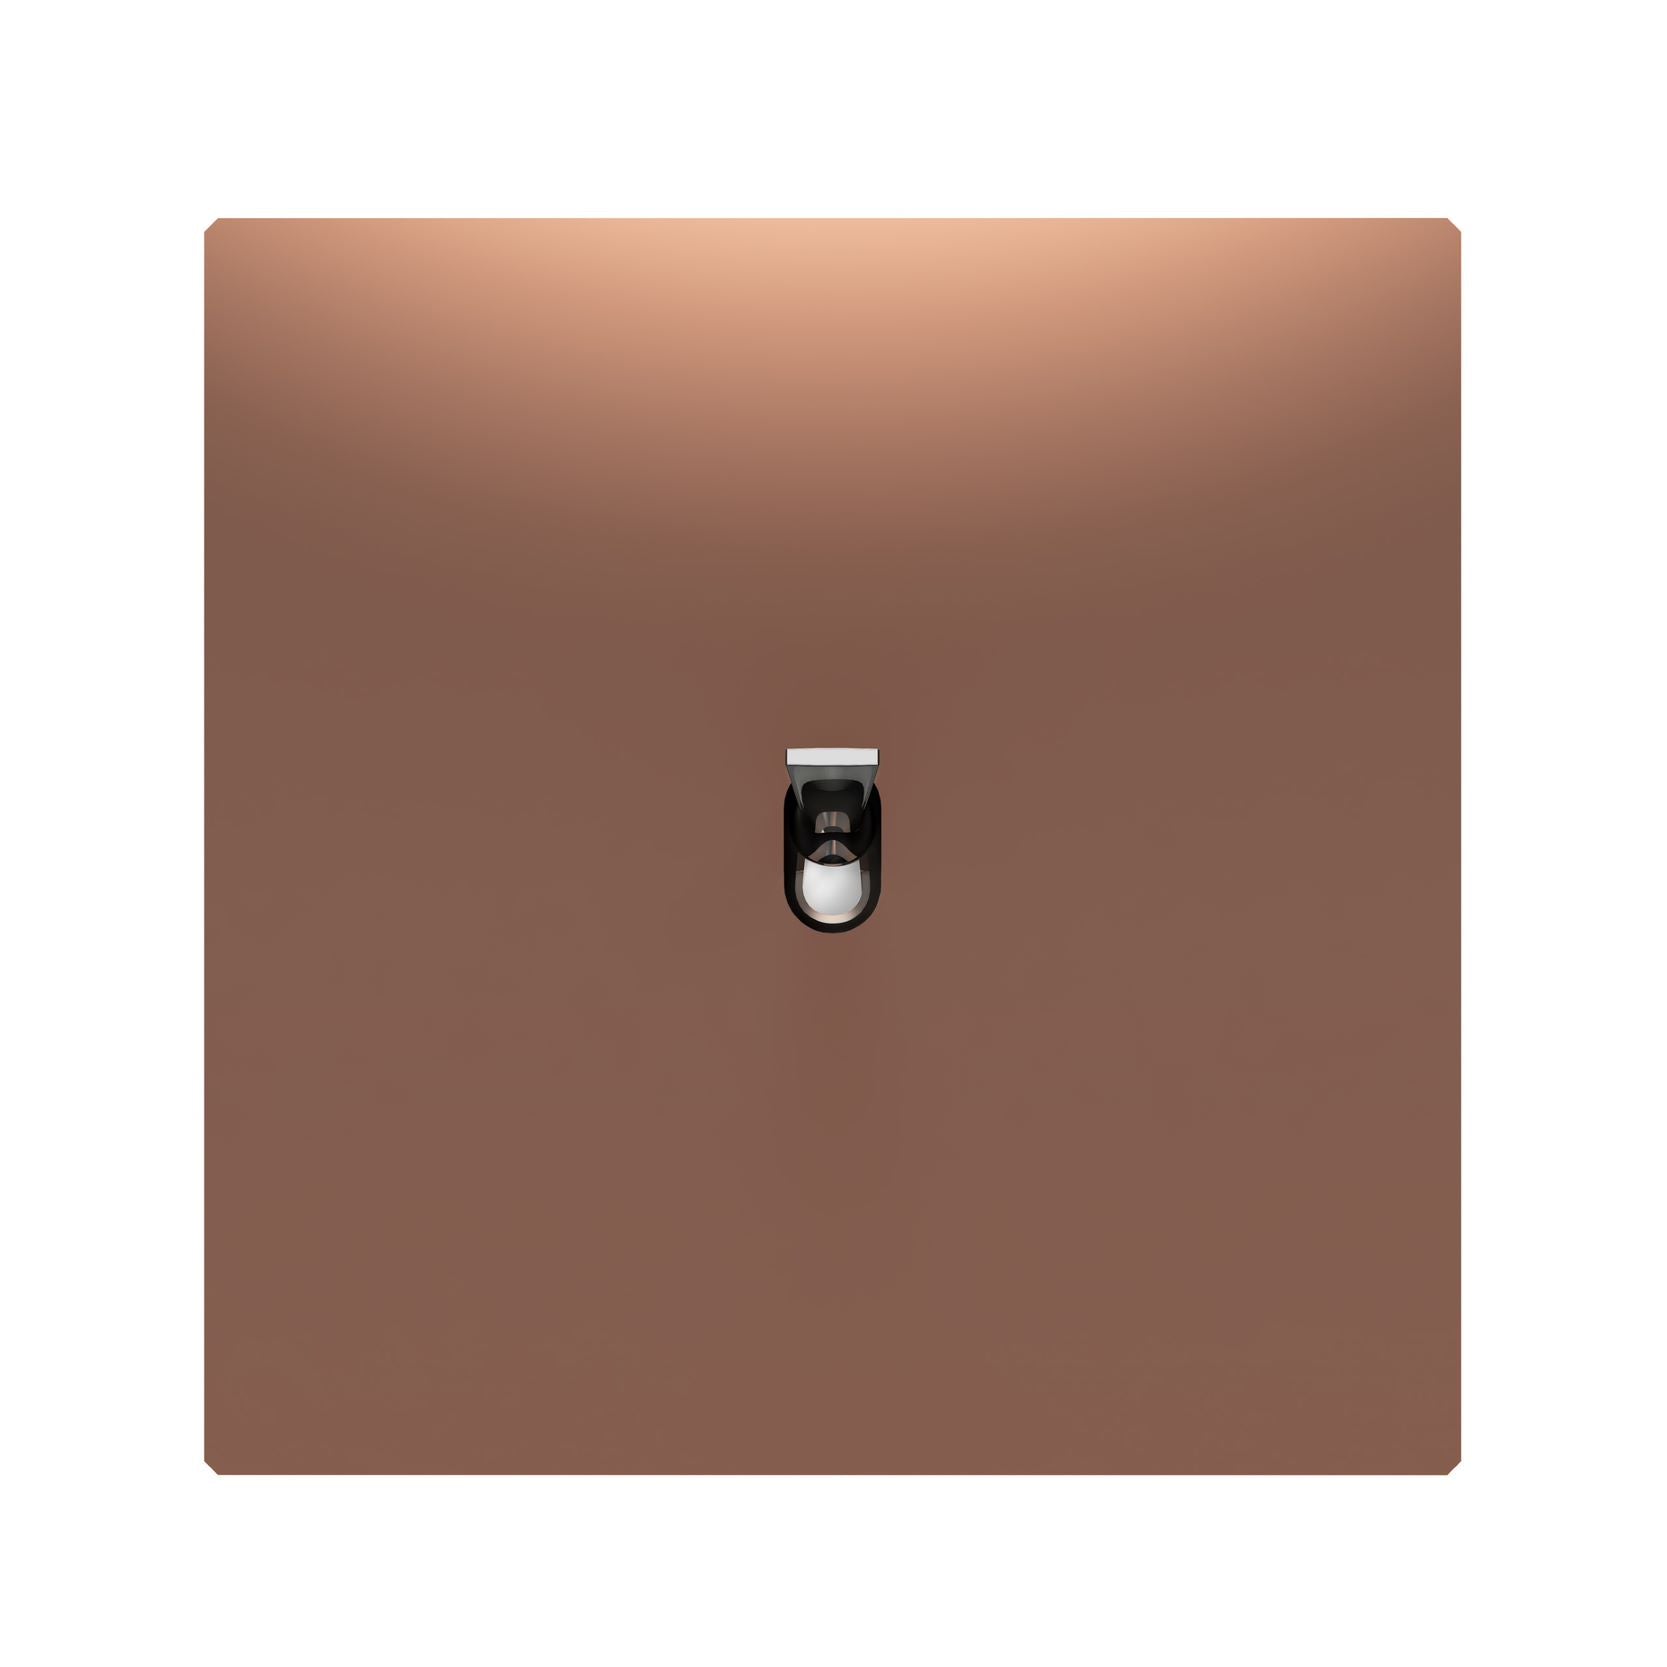 5.1 Switch in Bright Copper Brass with a Chrome Knob